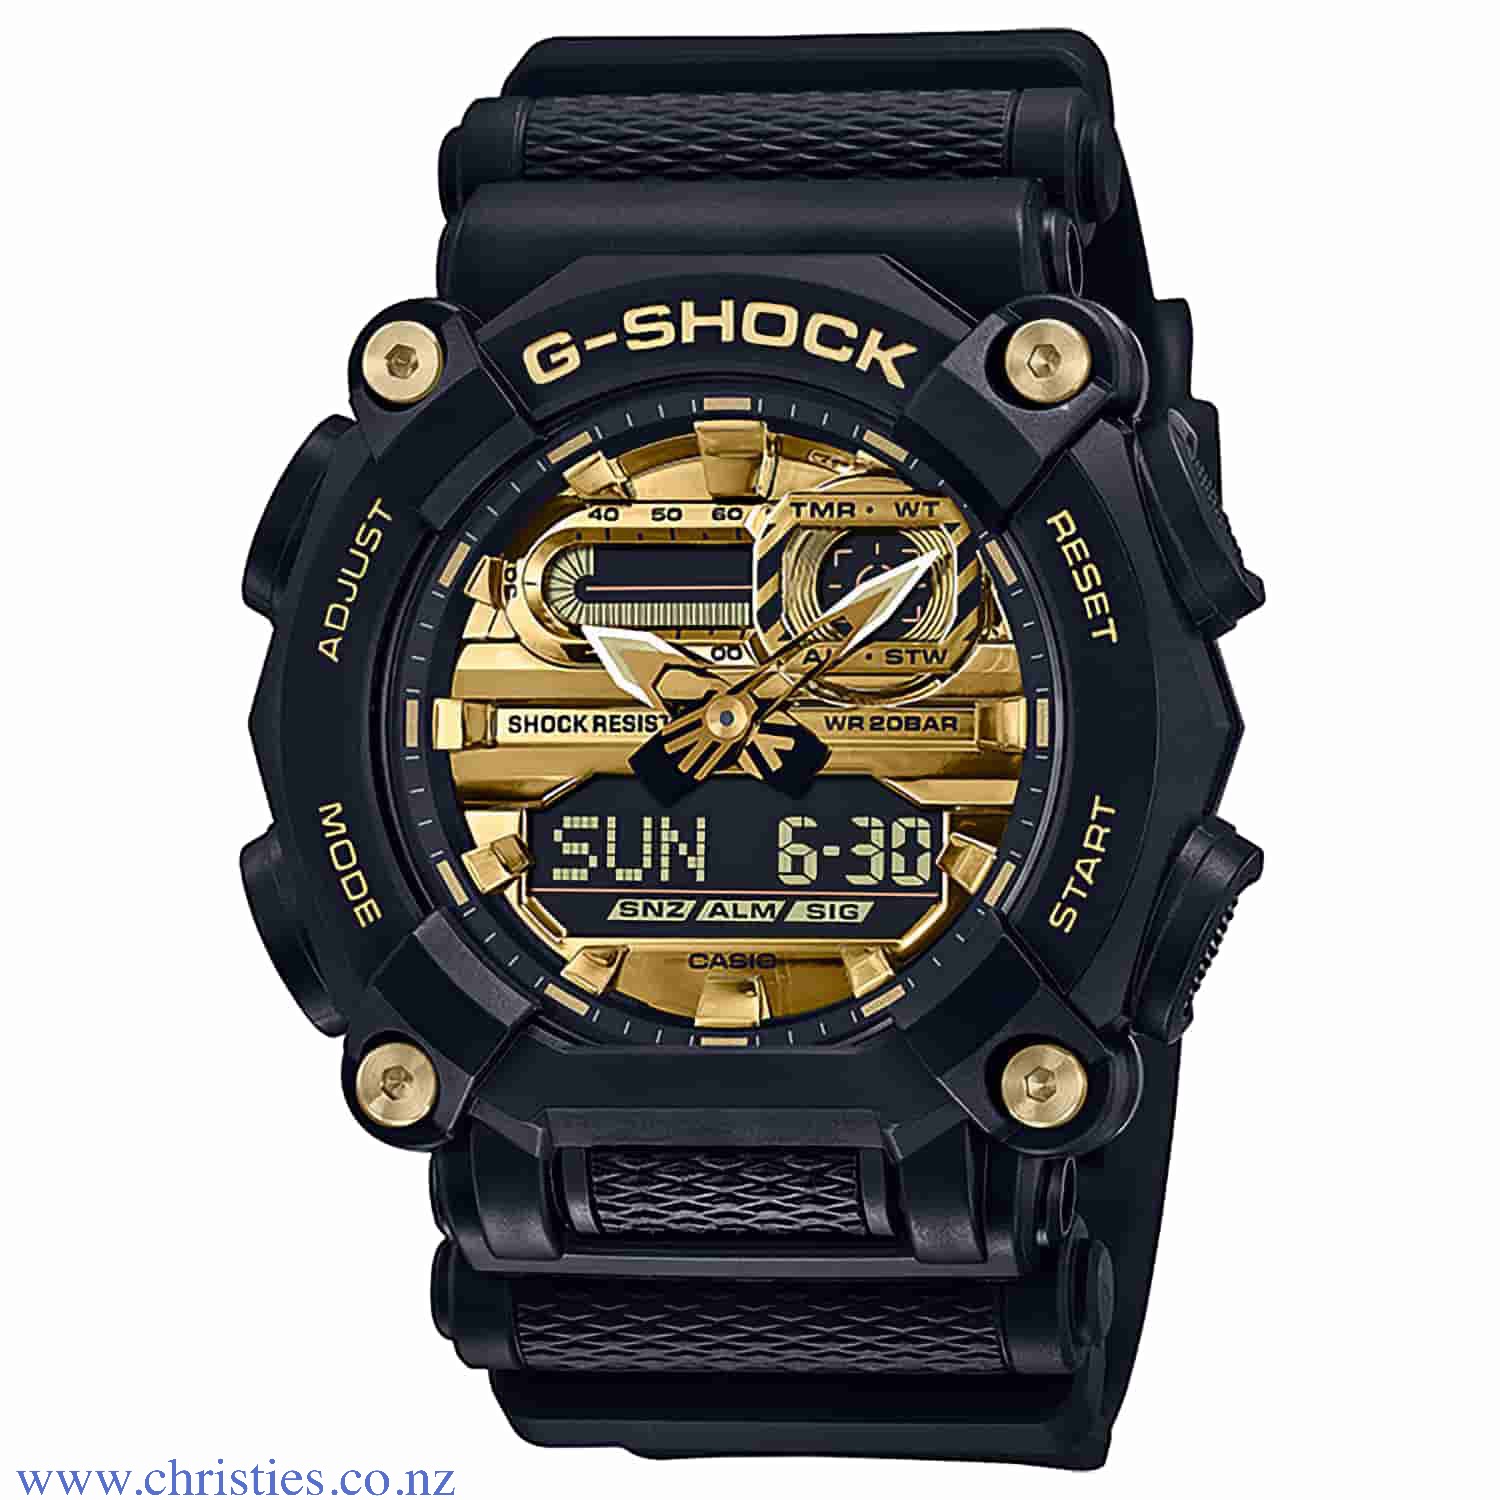 GA900AG-1A Casio G-Shock Watch. GA-900 Exceptional Colours - Turn heads and catch eyes with a G-SHOCK watch boasting a dazzling splash of colour. The design evokes an industrial feel with a 10-faceted bezel accented with four screws, evoking the nuts a G-